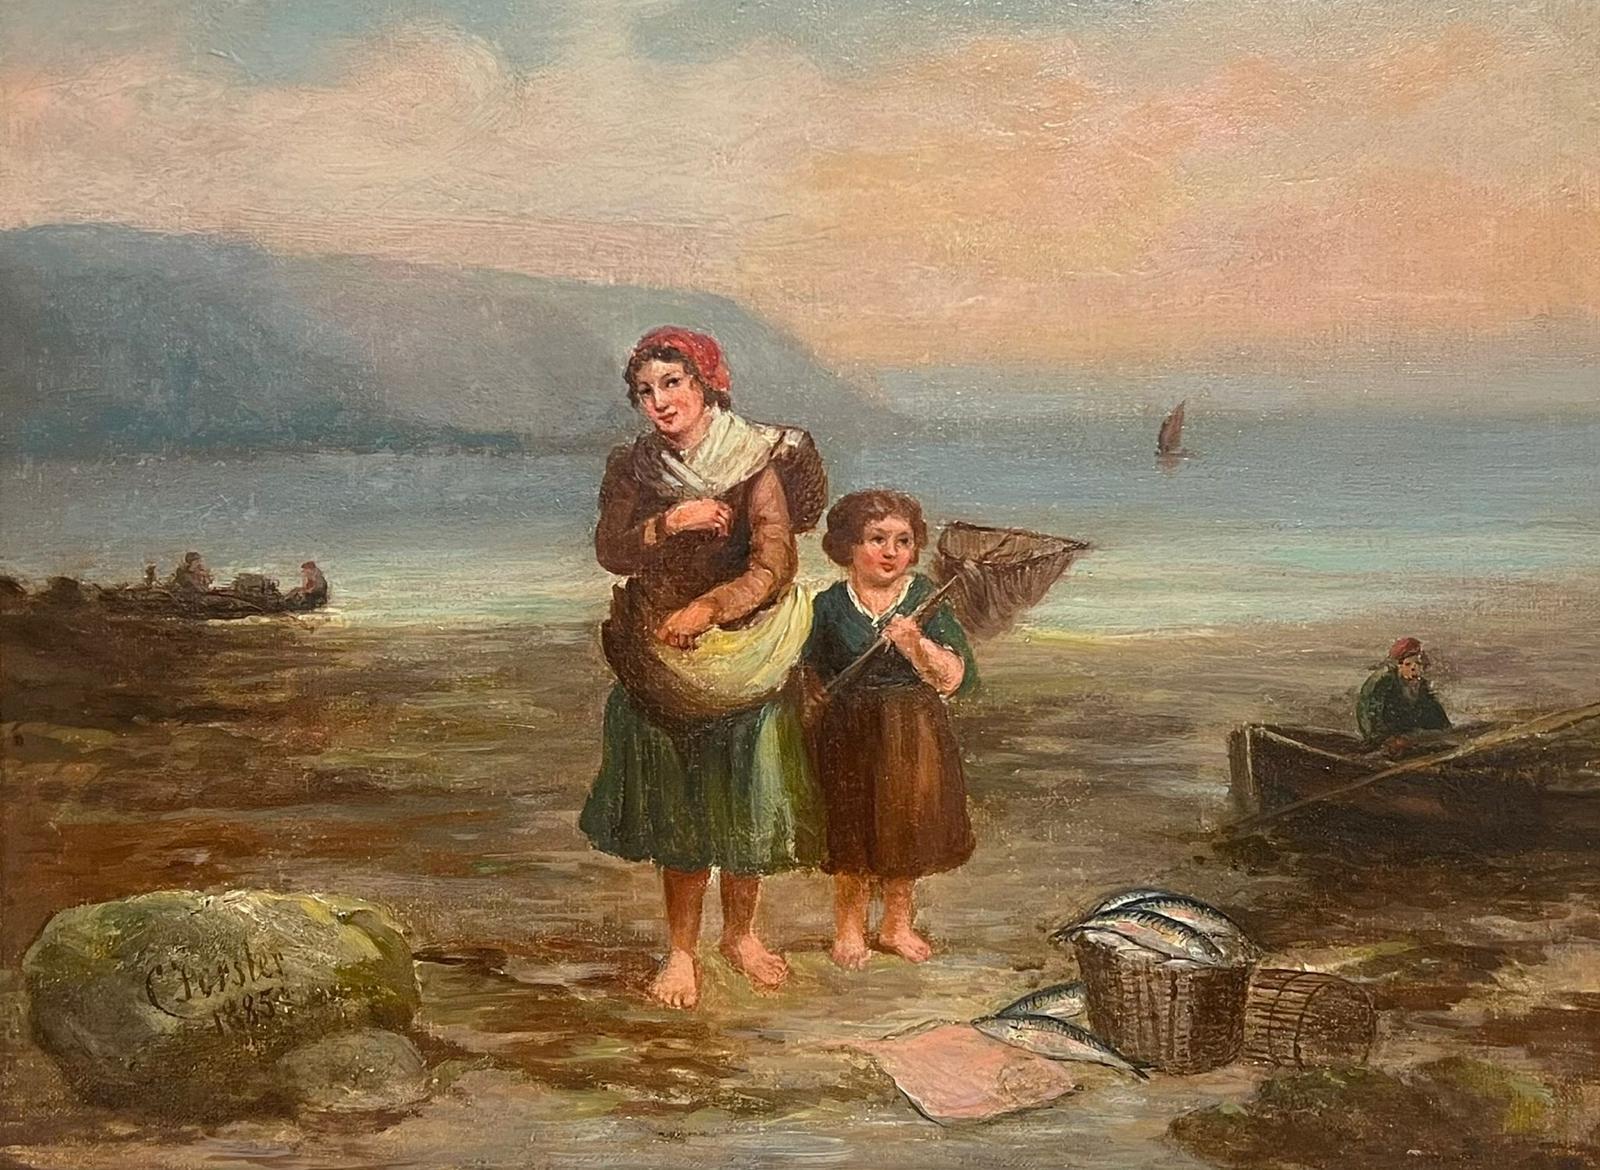 The Fisherfolk
by C. Forster, British 19th century
signed oil on canvas, framed
dated 1885
framed: 17 x 21 inches
canvas: 12 x 16 inches
provenance: private collection, England
condition: very good and sound condition